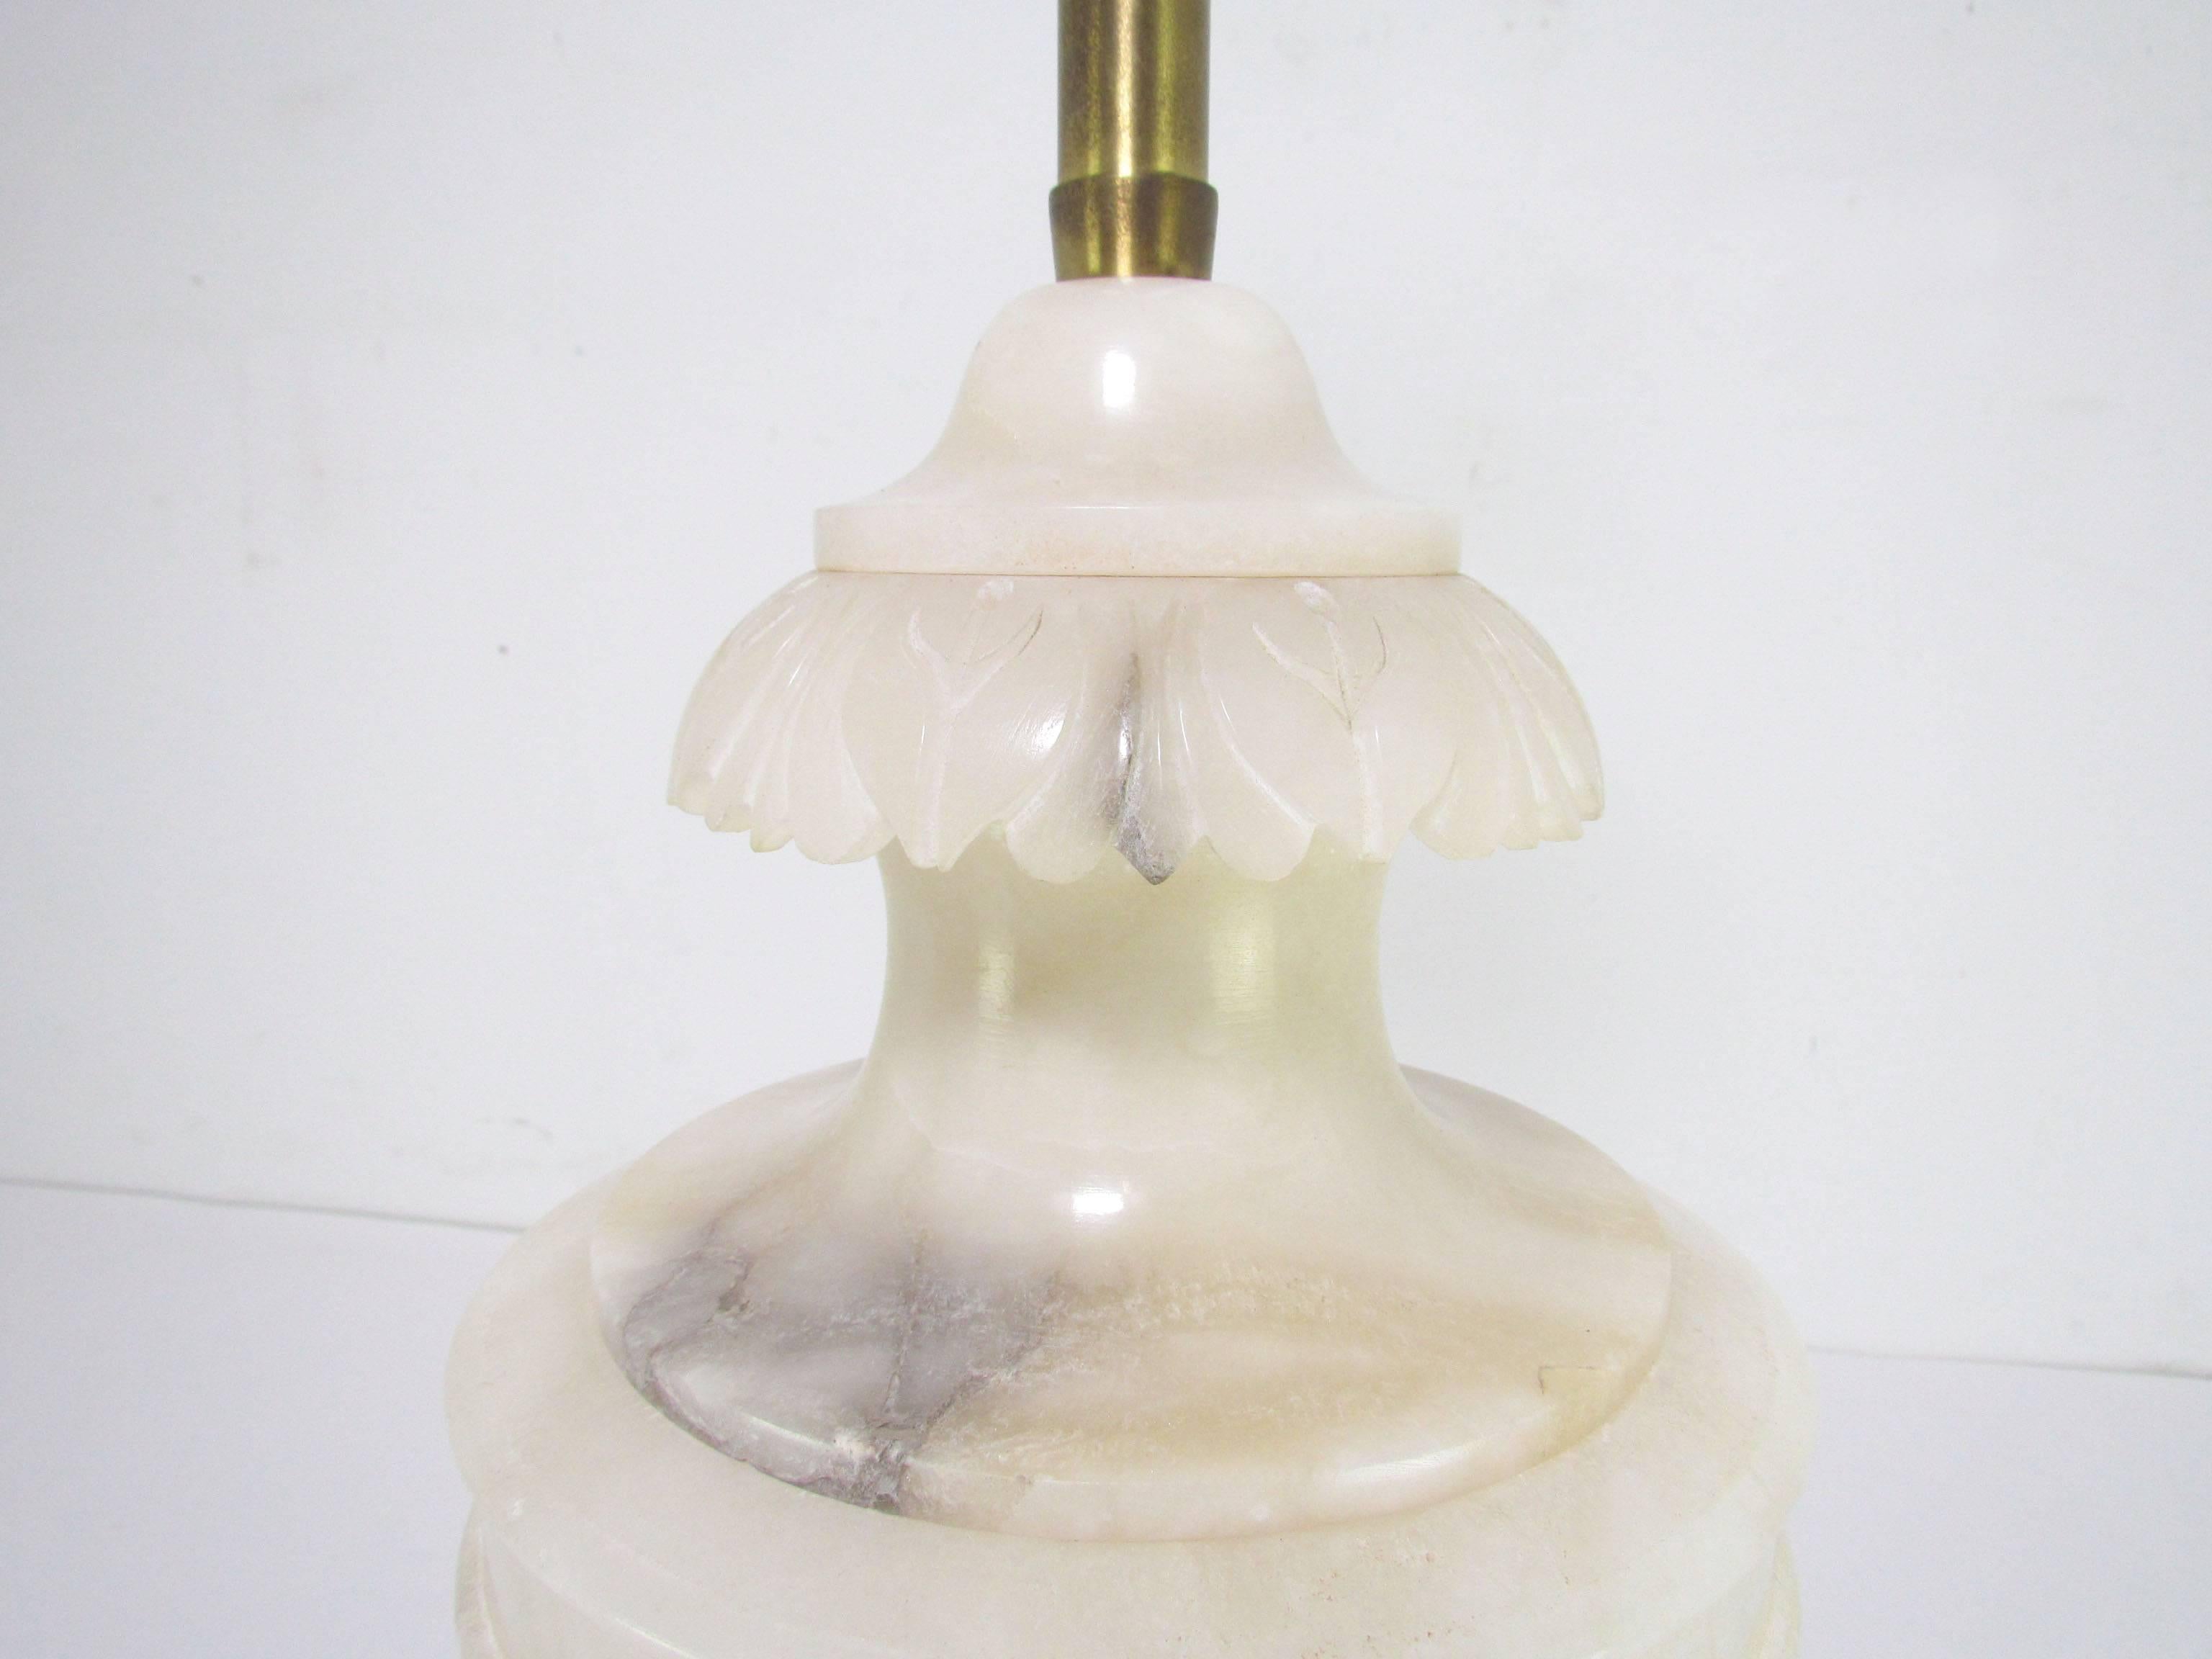 Hollywood Regency Carved Alabaster Table Lamp by Marbro Lamp Co., circa 1950s